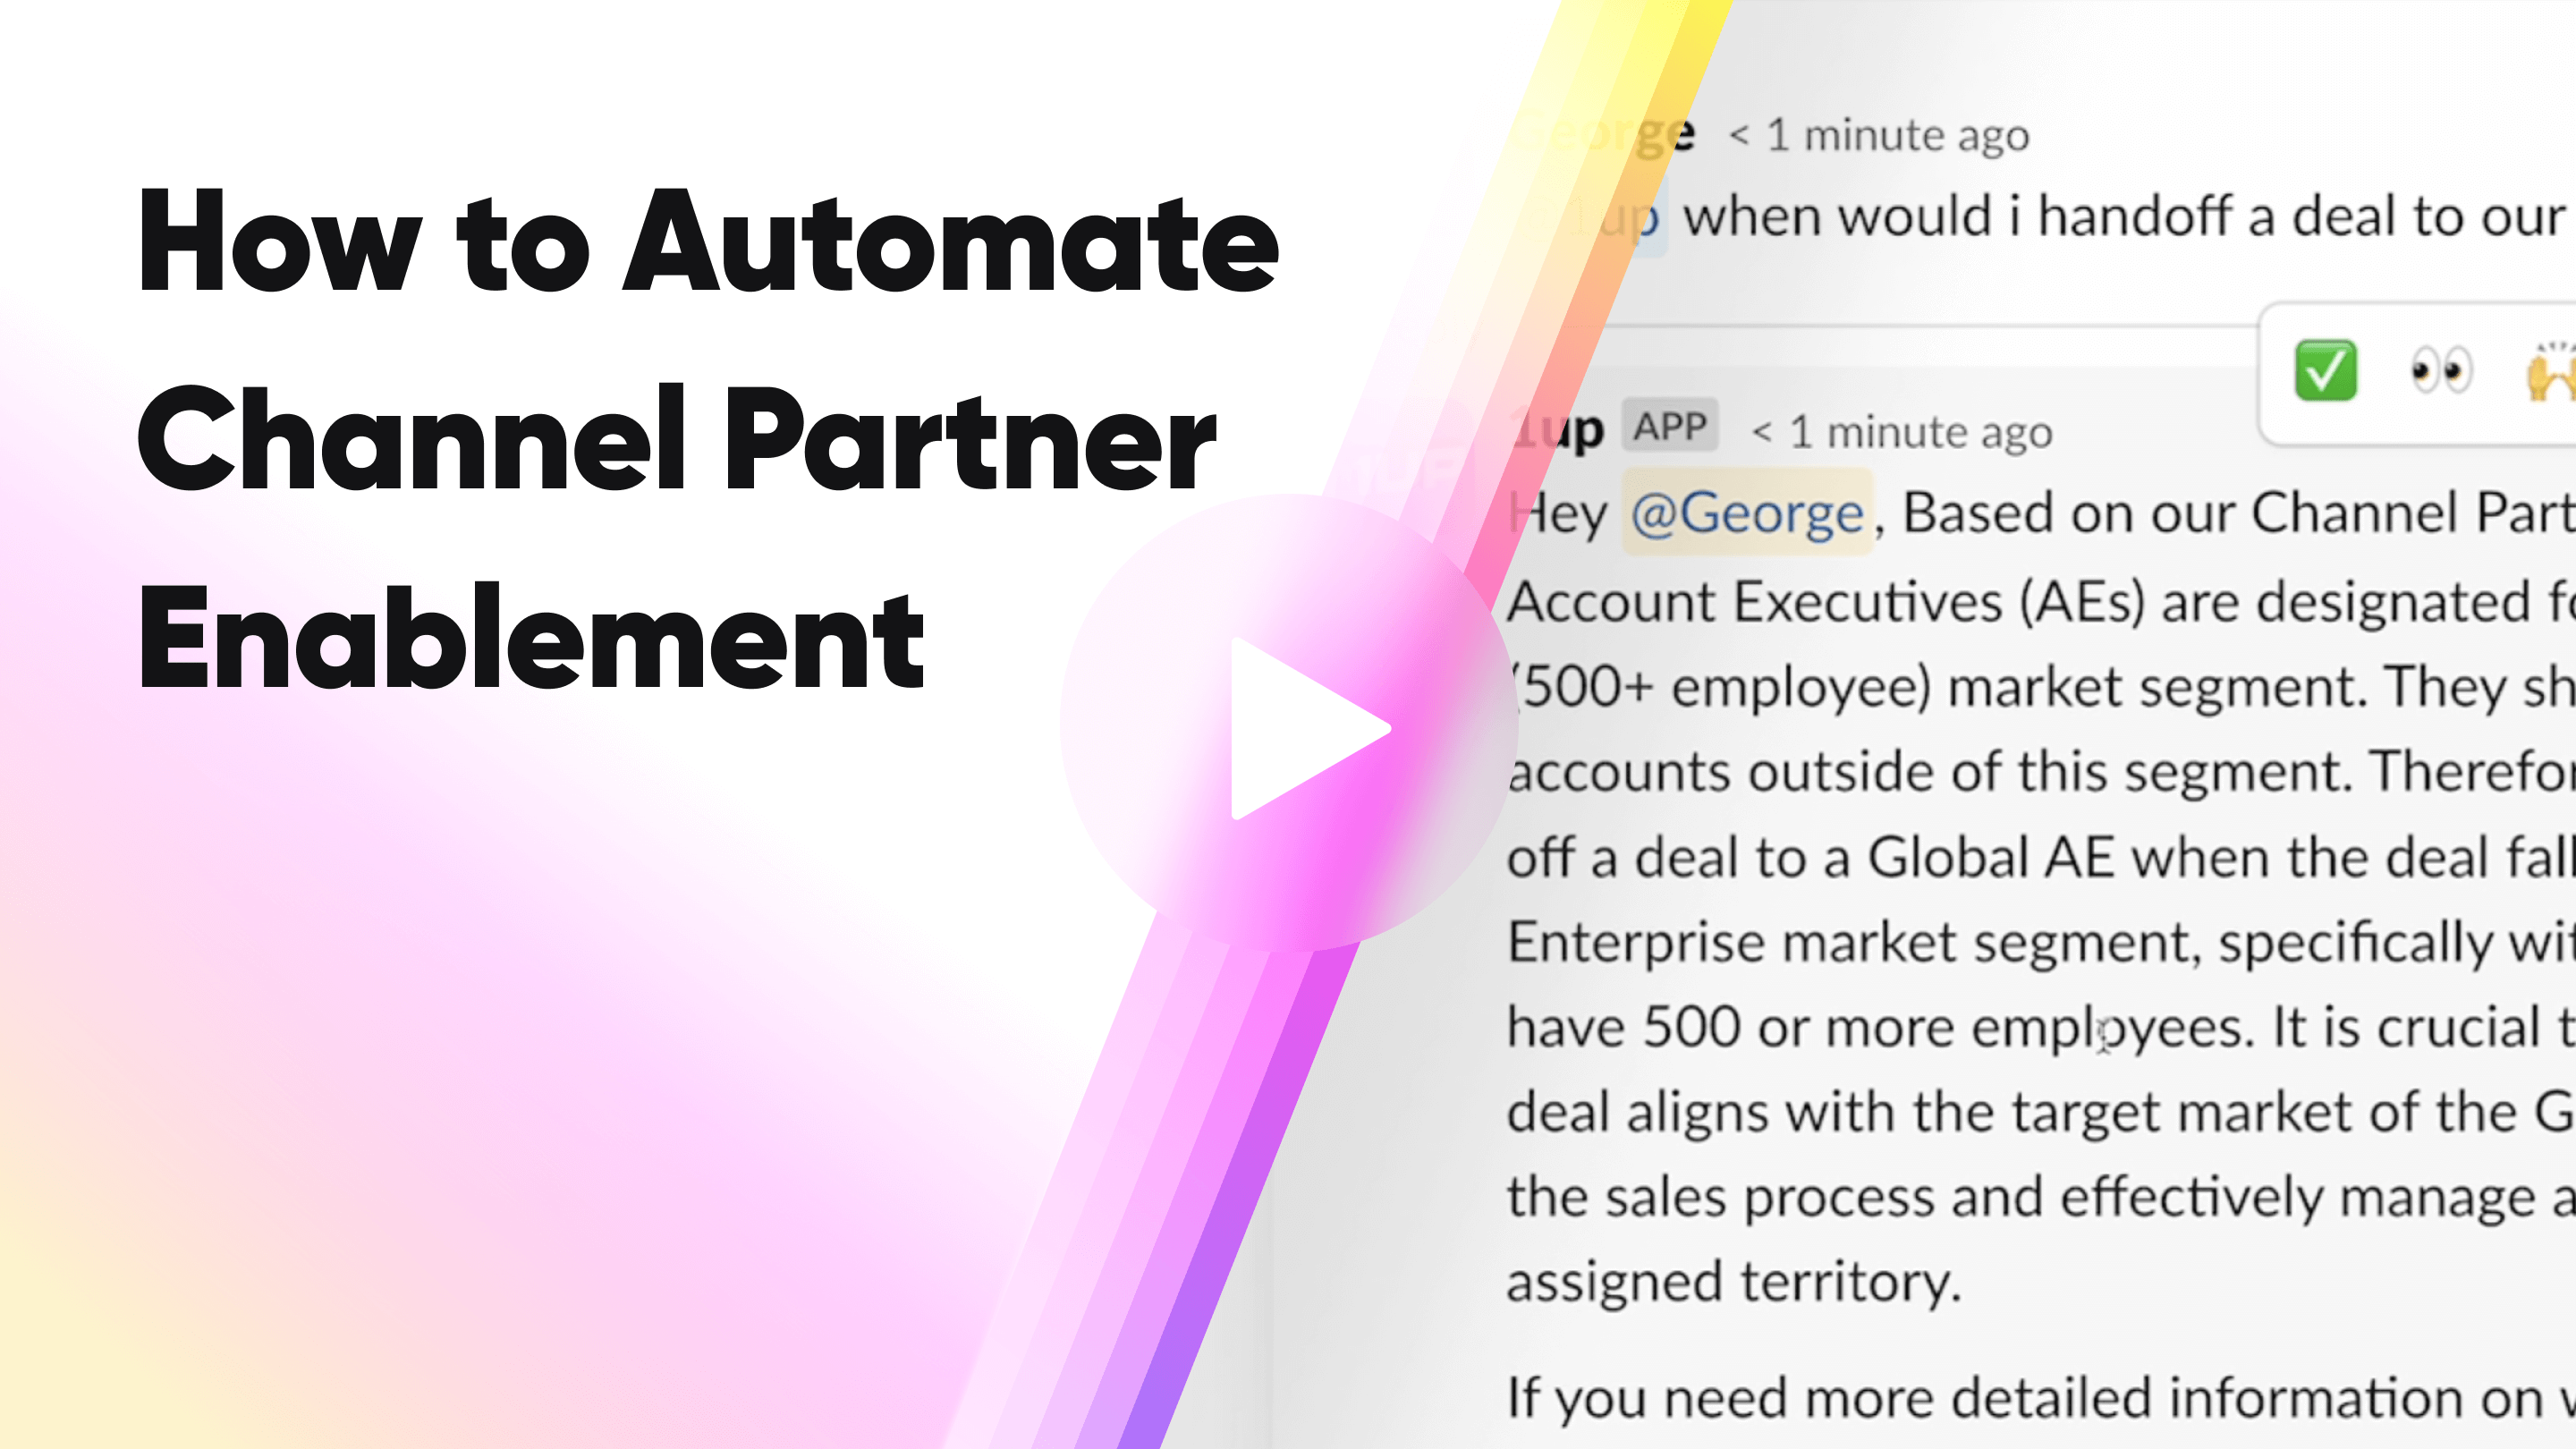 Automating Channel Partner Enablement with AI